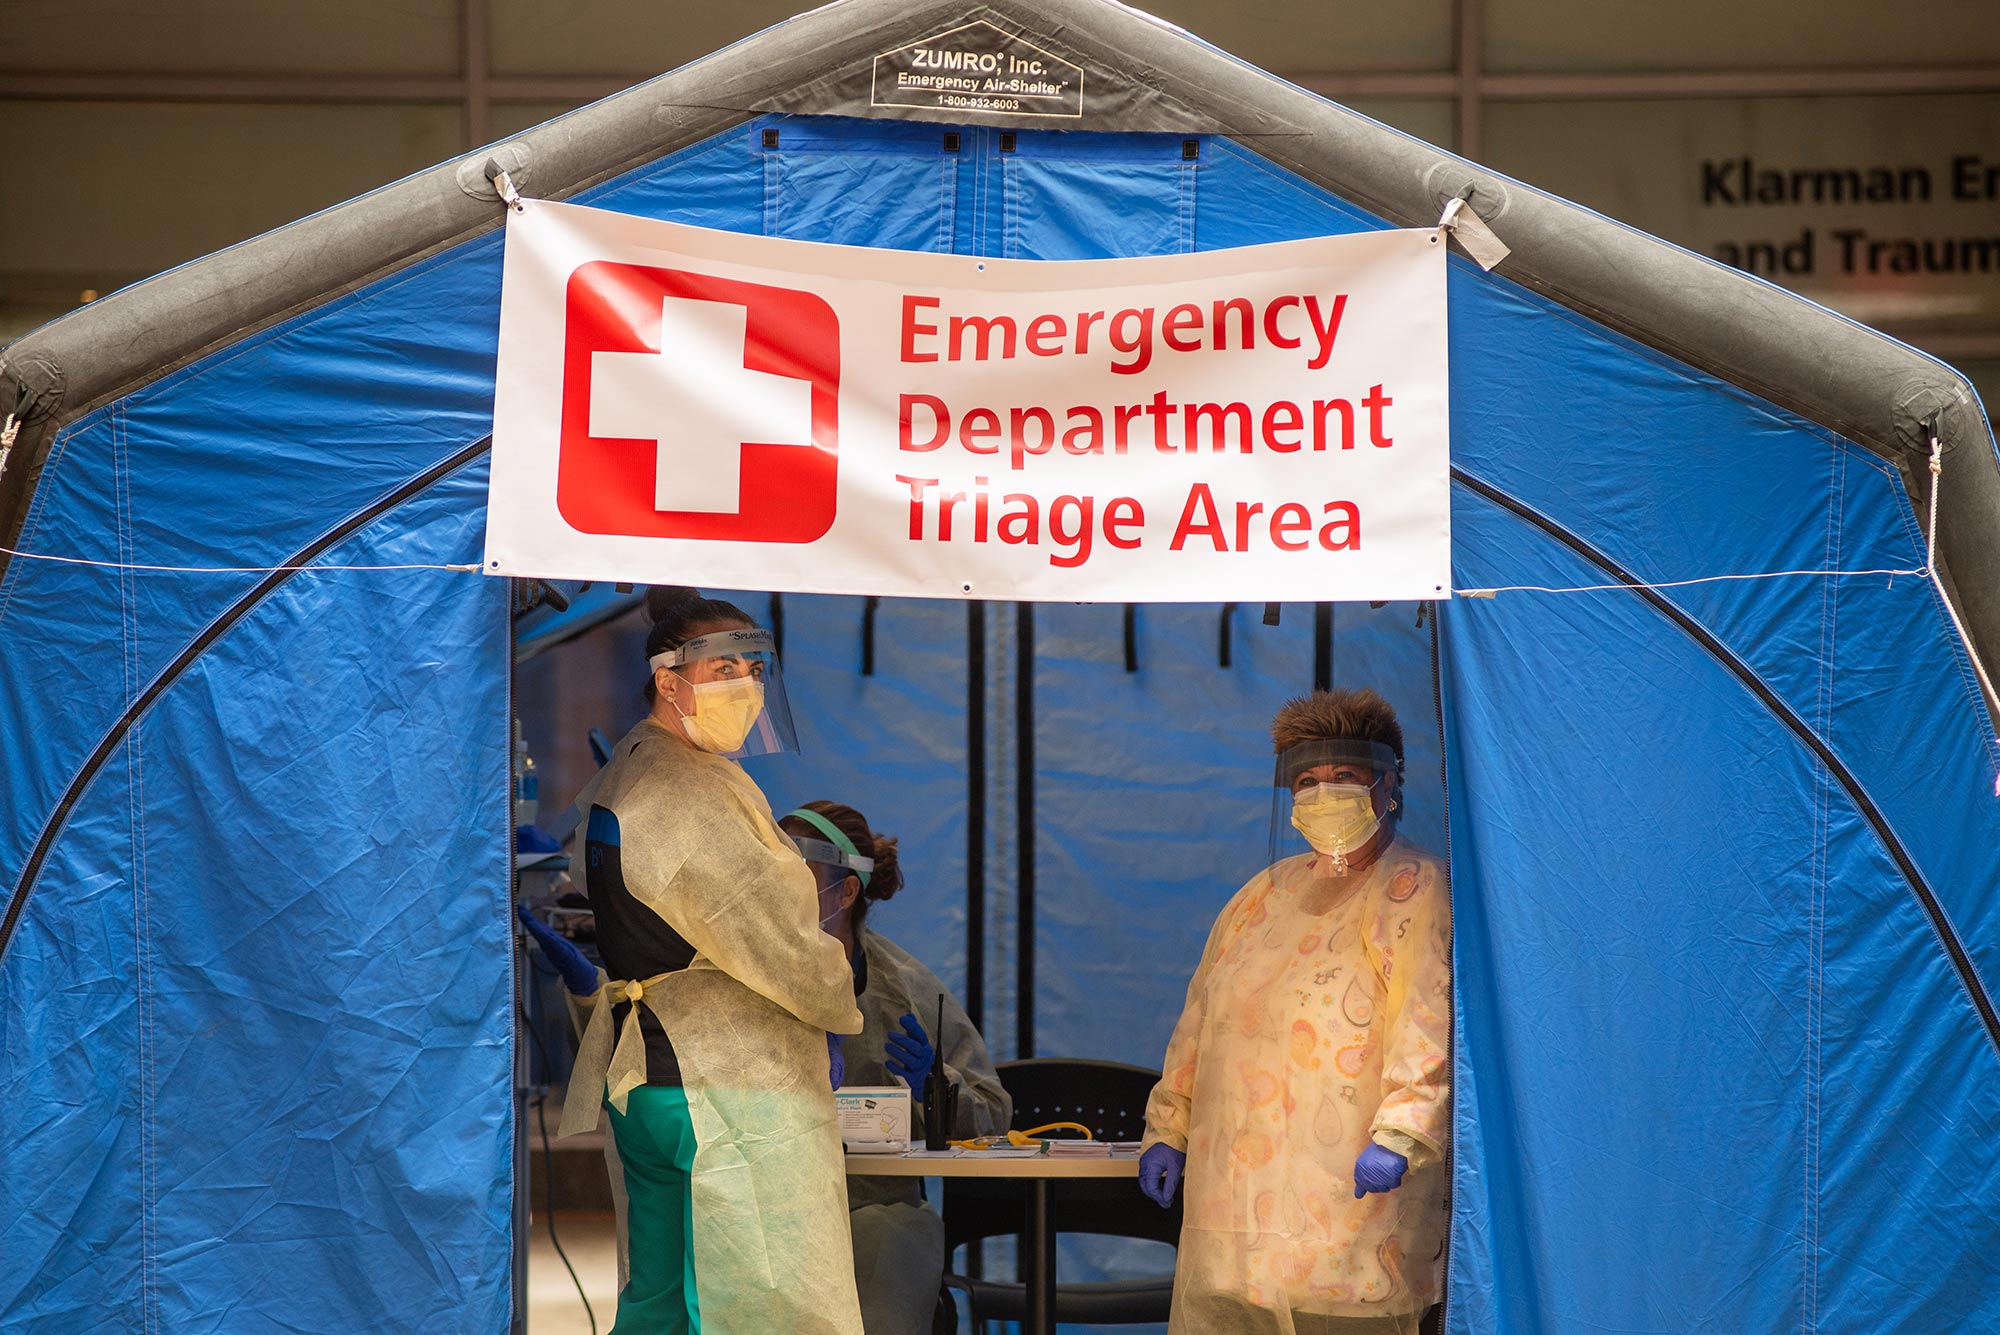 Image of Marisa McIntyre, RN, left, and Maureen Shanahan-Frappier, RN, waiting for patients outside Boston Medical Center March 20, 2020 in a blue tent with a sign that says "Emergency Department Triage Area."